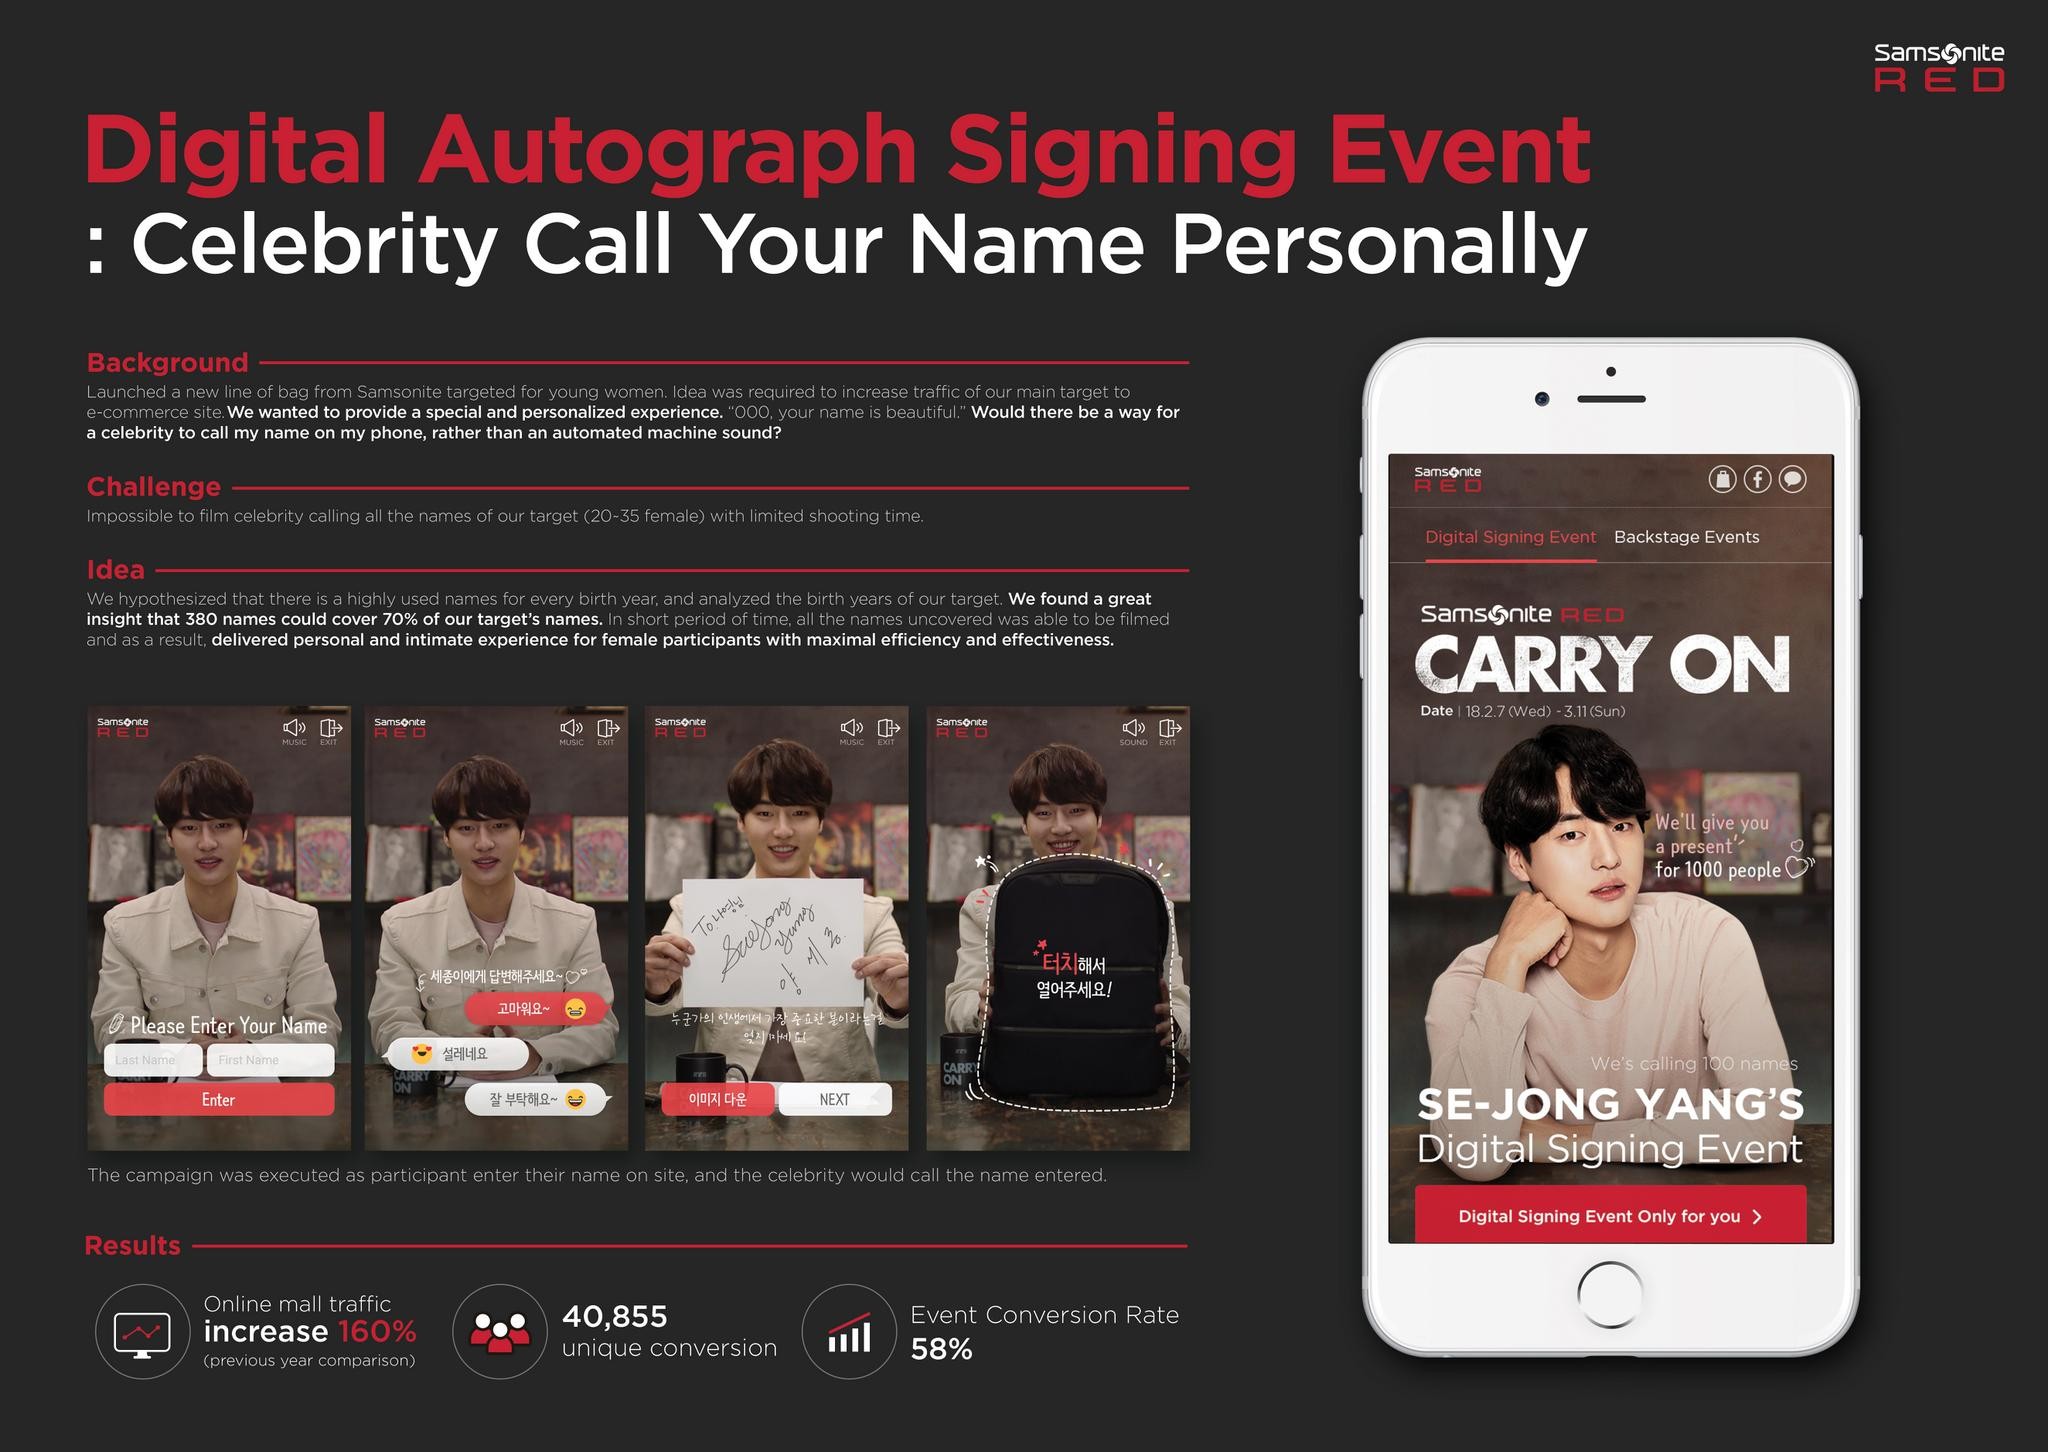 Digital Autograph Signing Event that Calls Your Name.